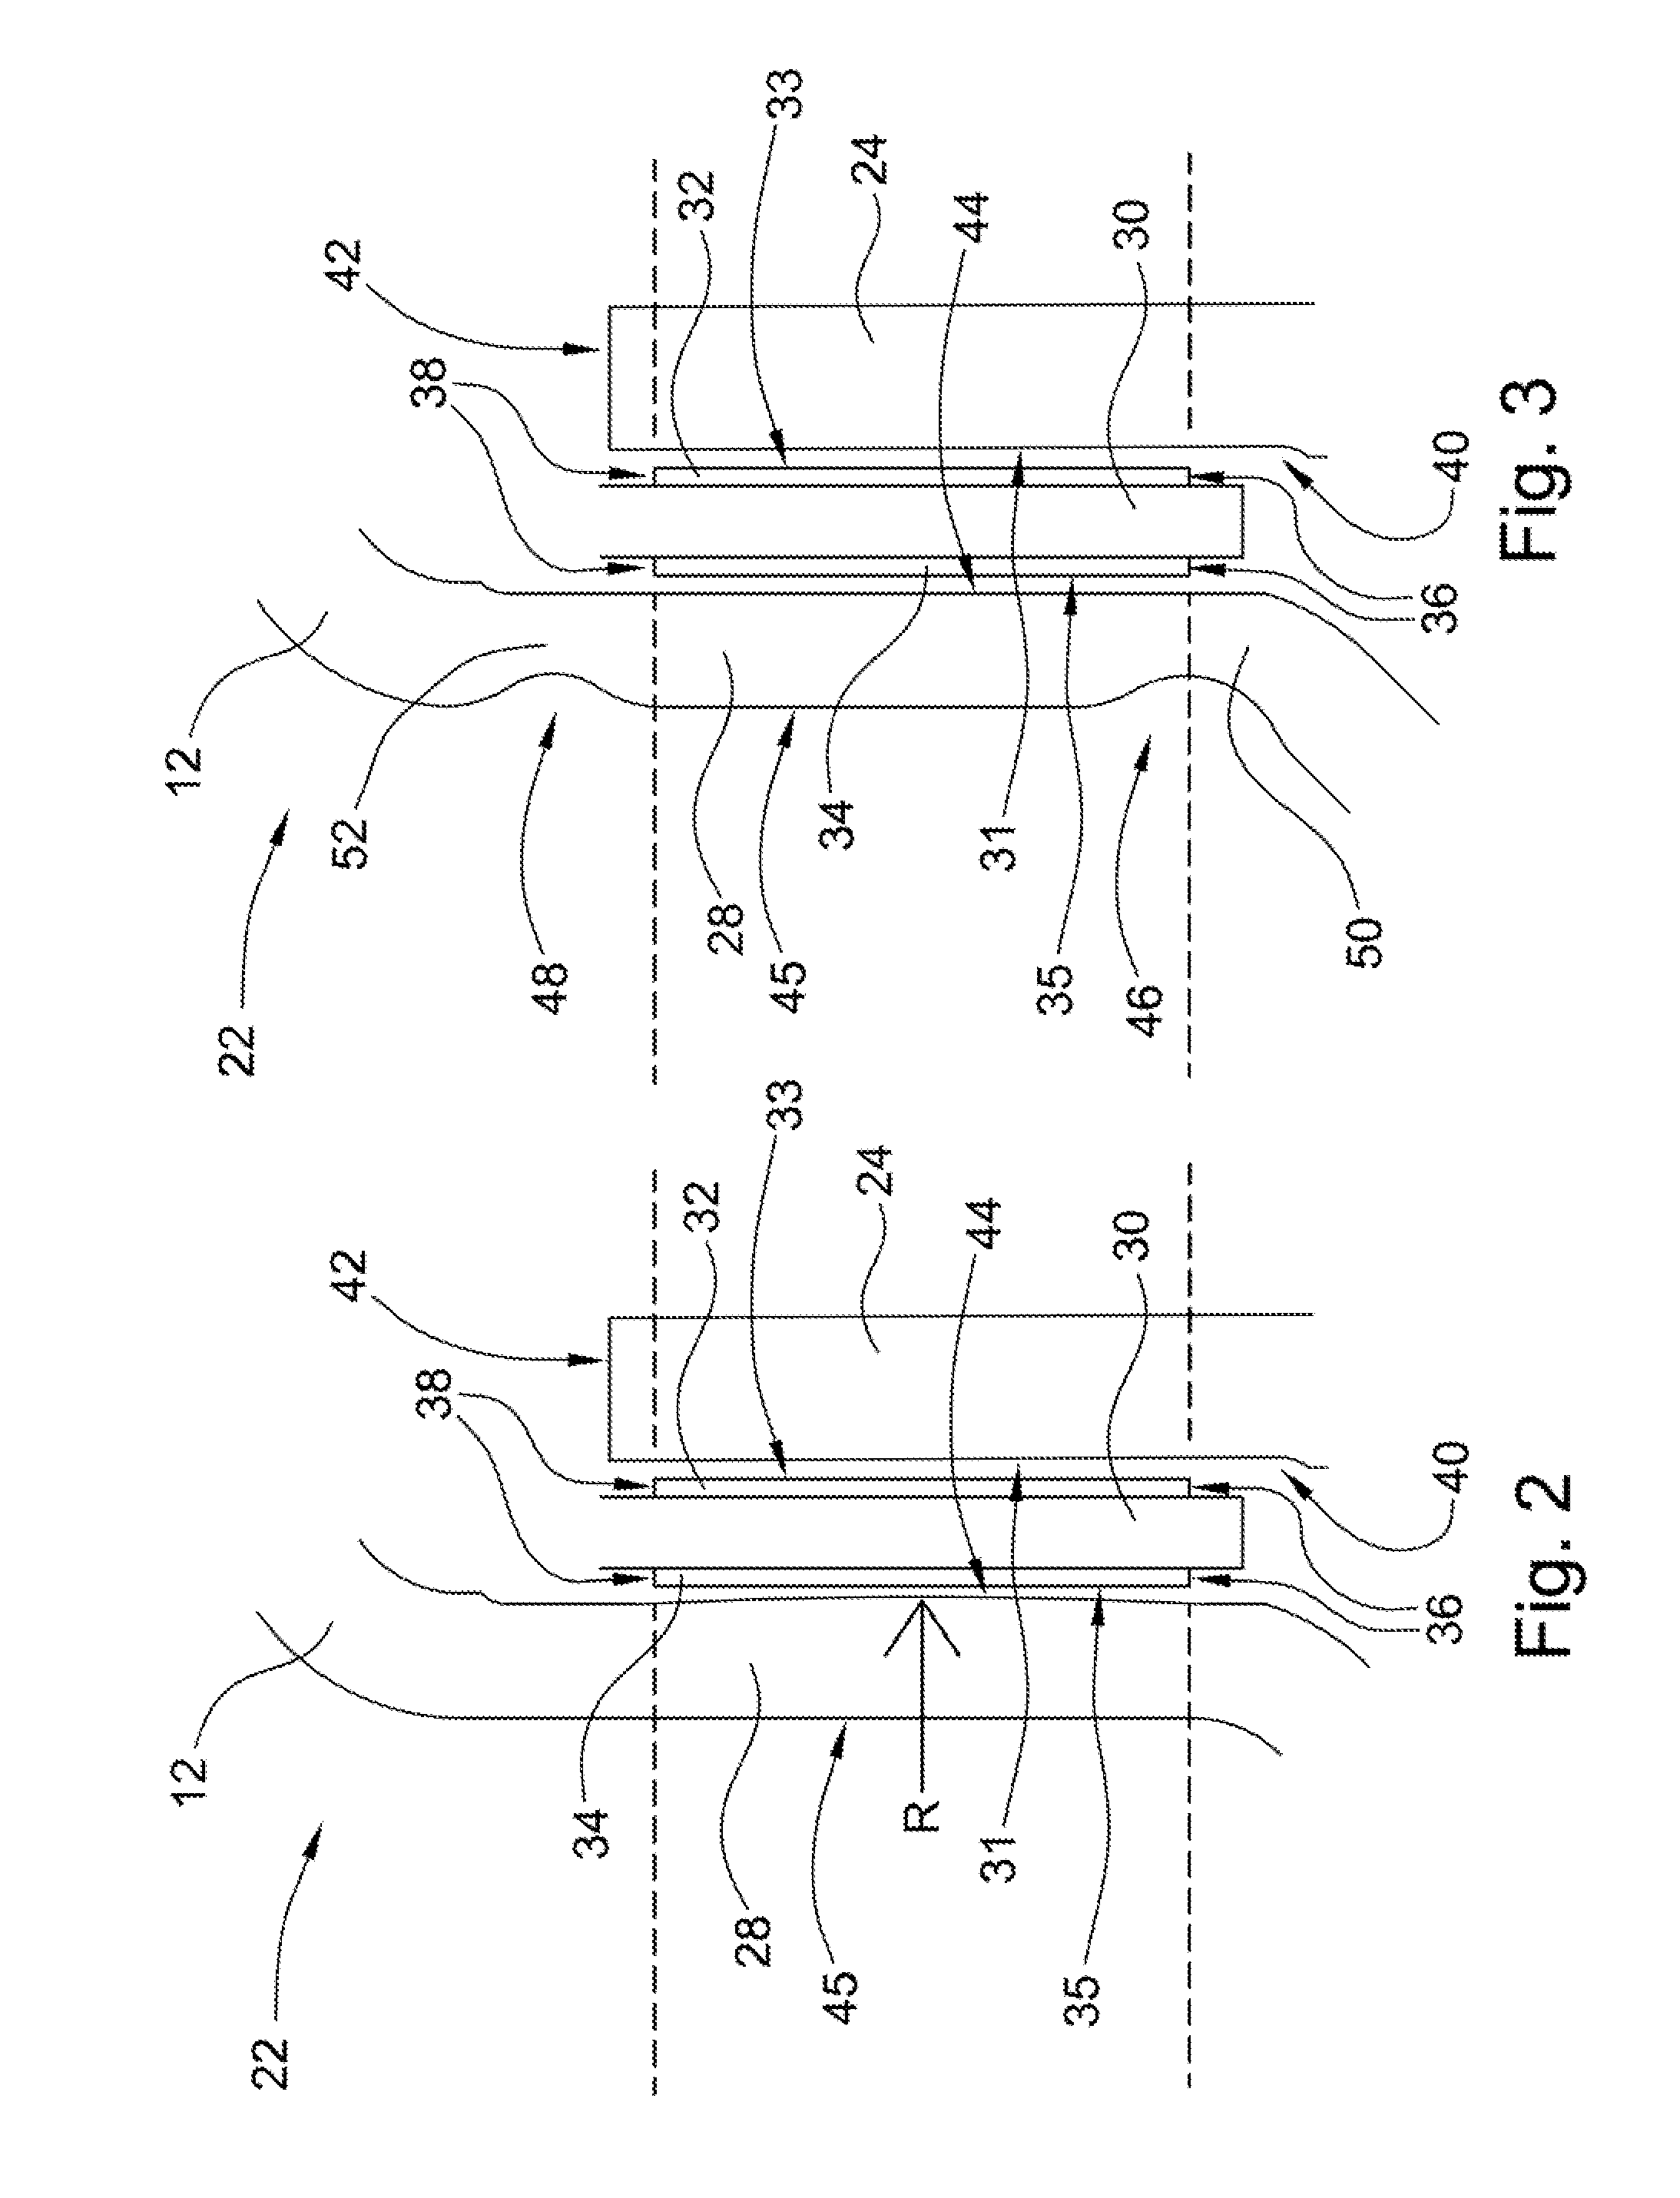 Modified friction member for balanced unit loading